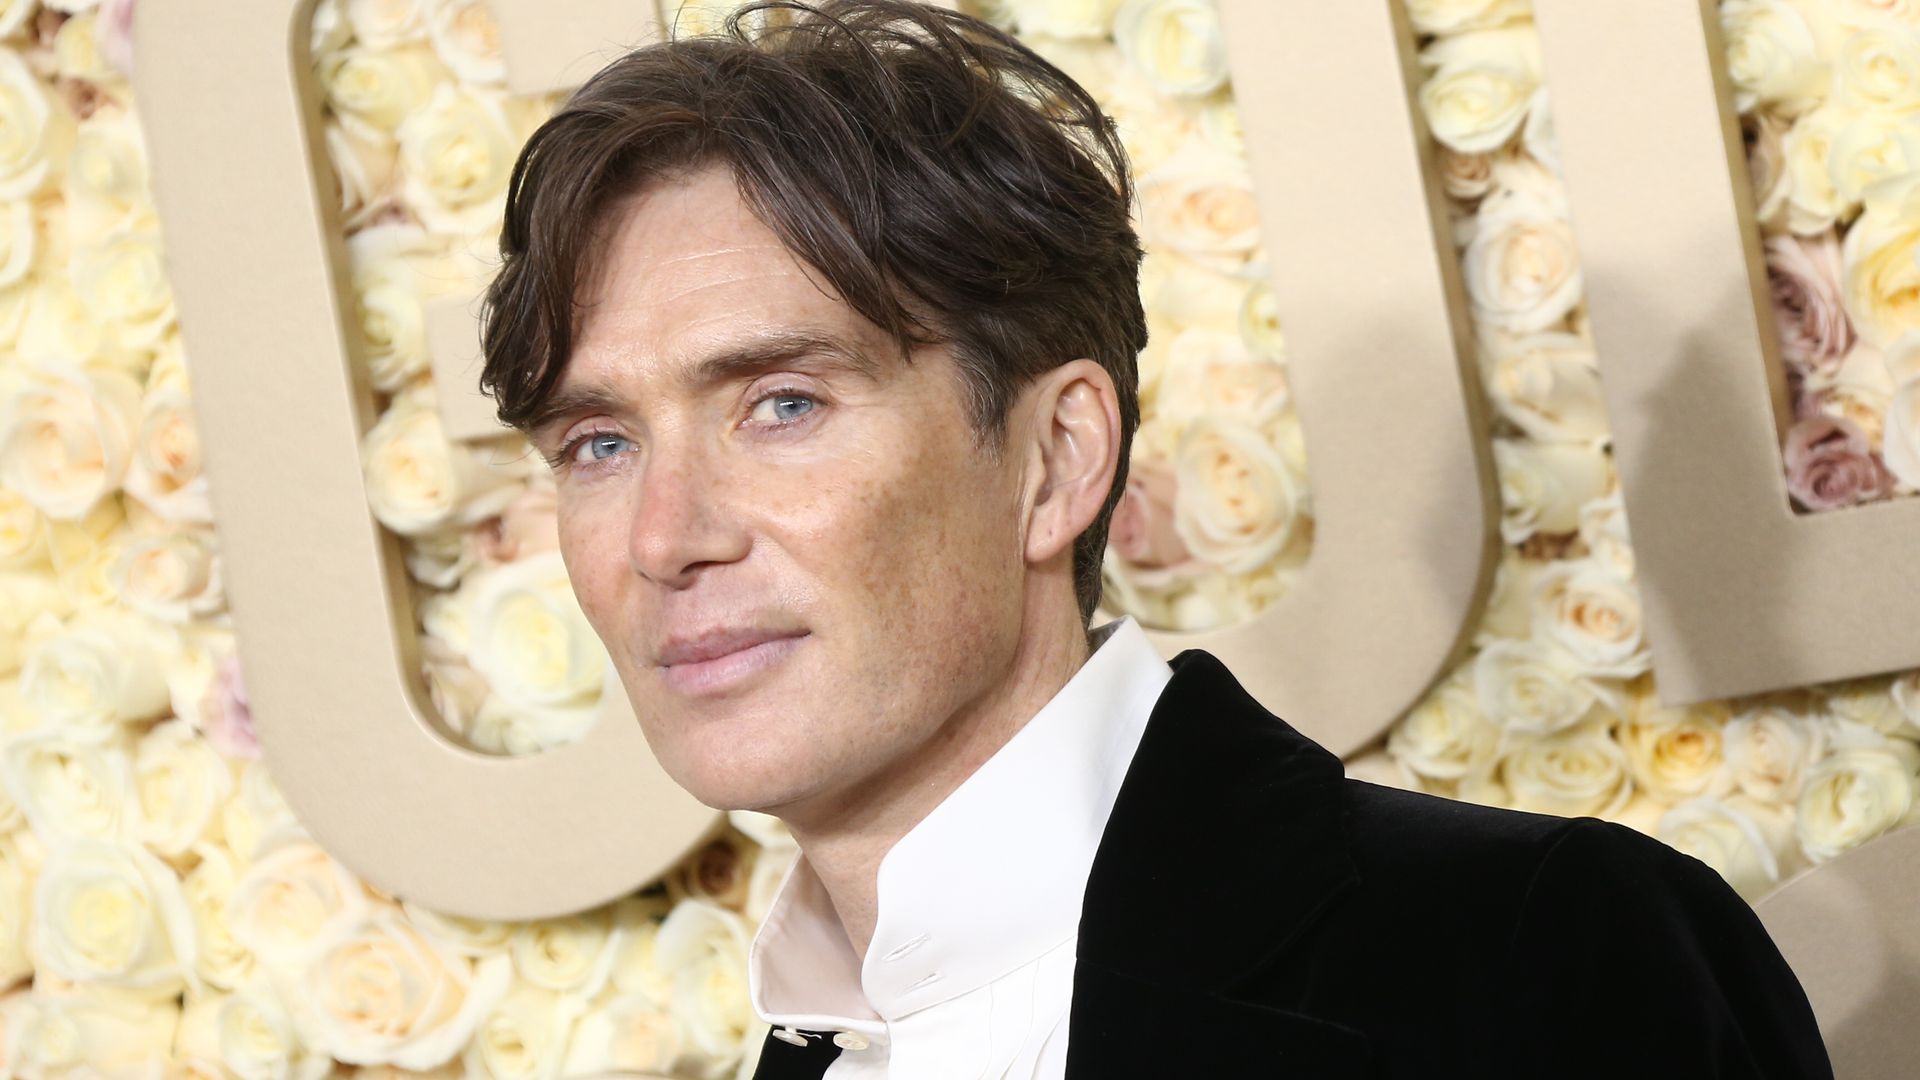 Cillian Murphy at the 81st Golden Globe Awards held at the Beverly Hilton Hotel on January 7, 2024 in Beverly Hills, California